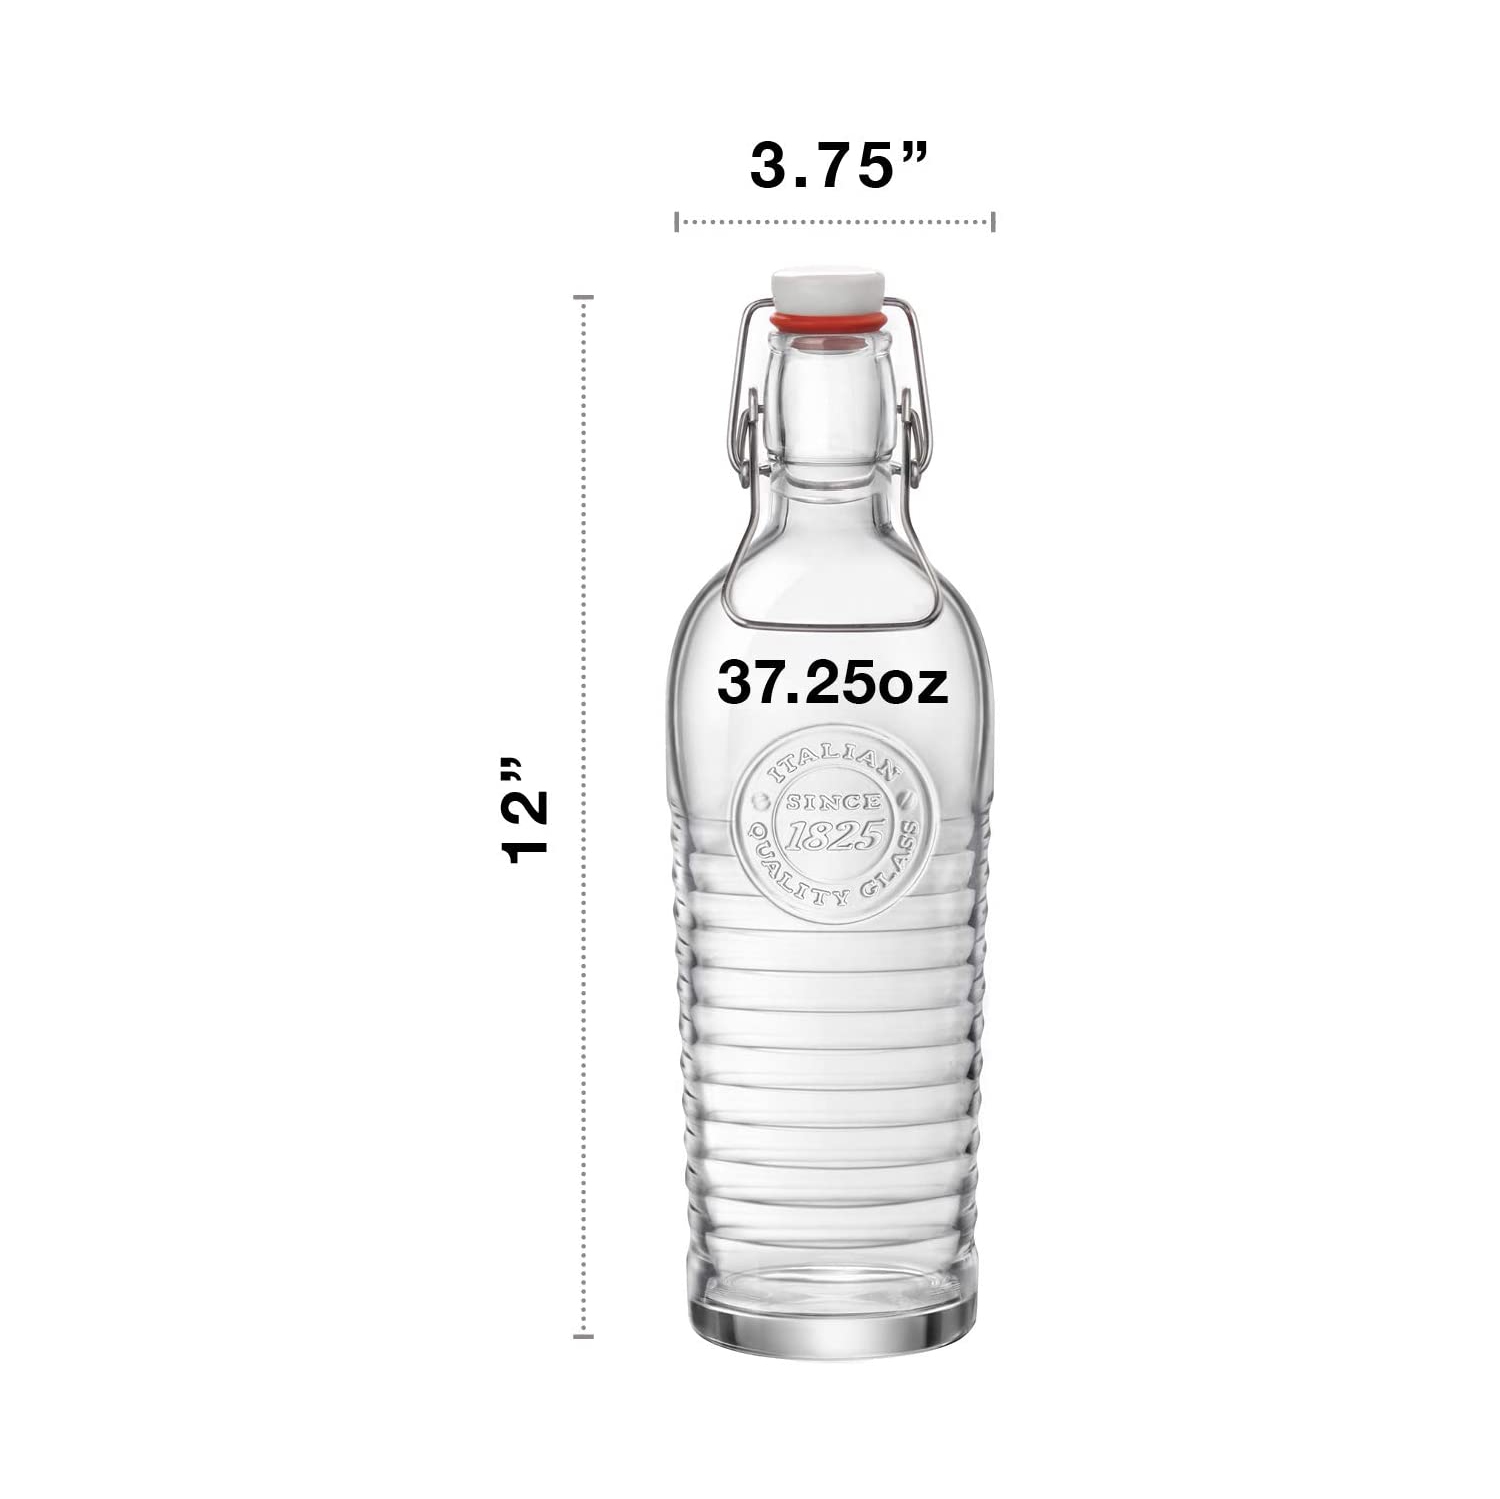 Bormioli Rocco Officina Water Bottle - (1.1L / 37.25 Oz), Italian Glass Pitcher with Airtight Seal & Metal Clamp